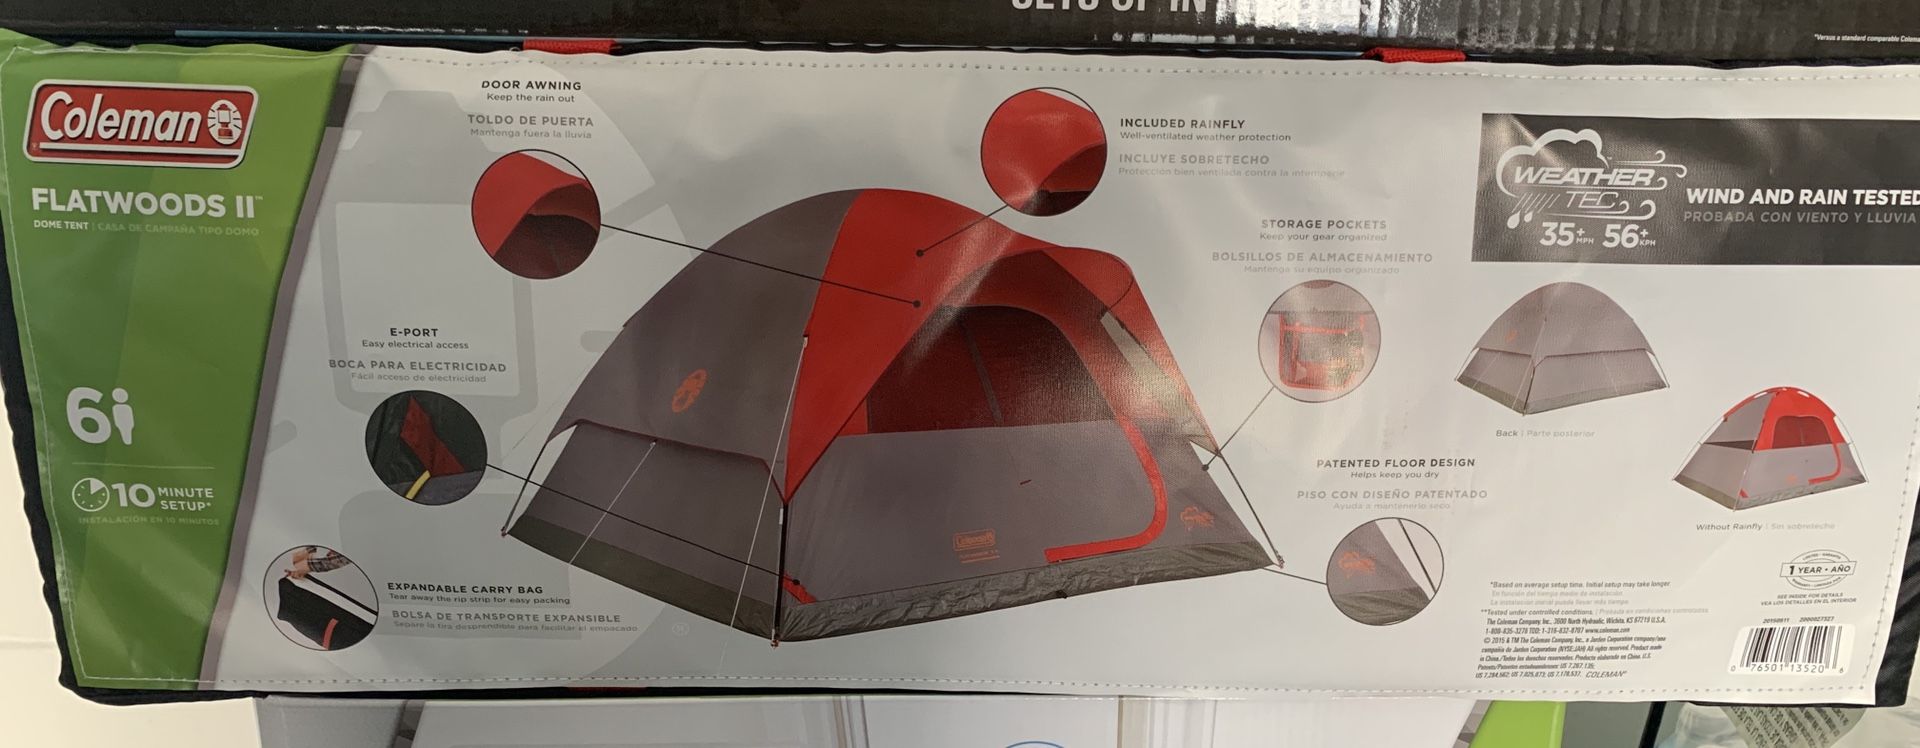 Camping tent for 6 person